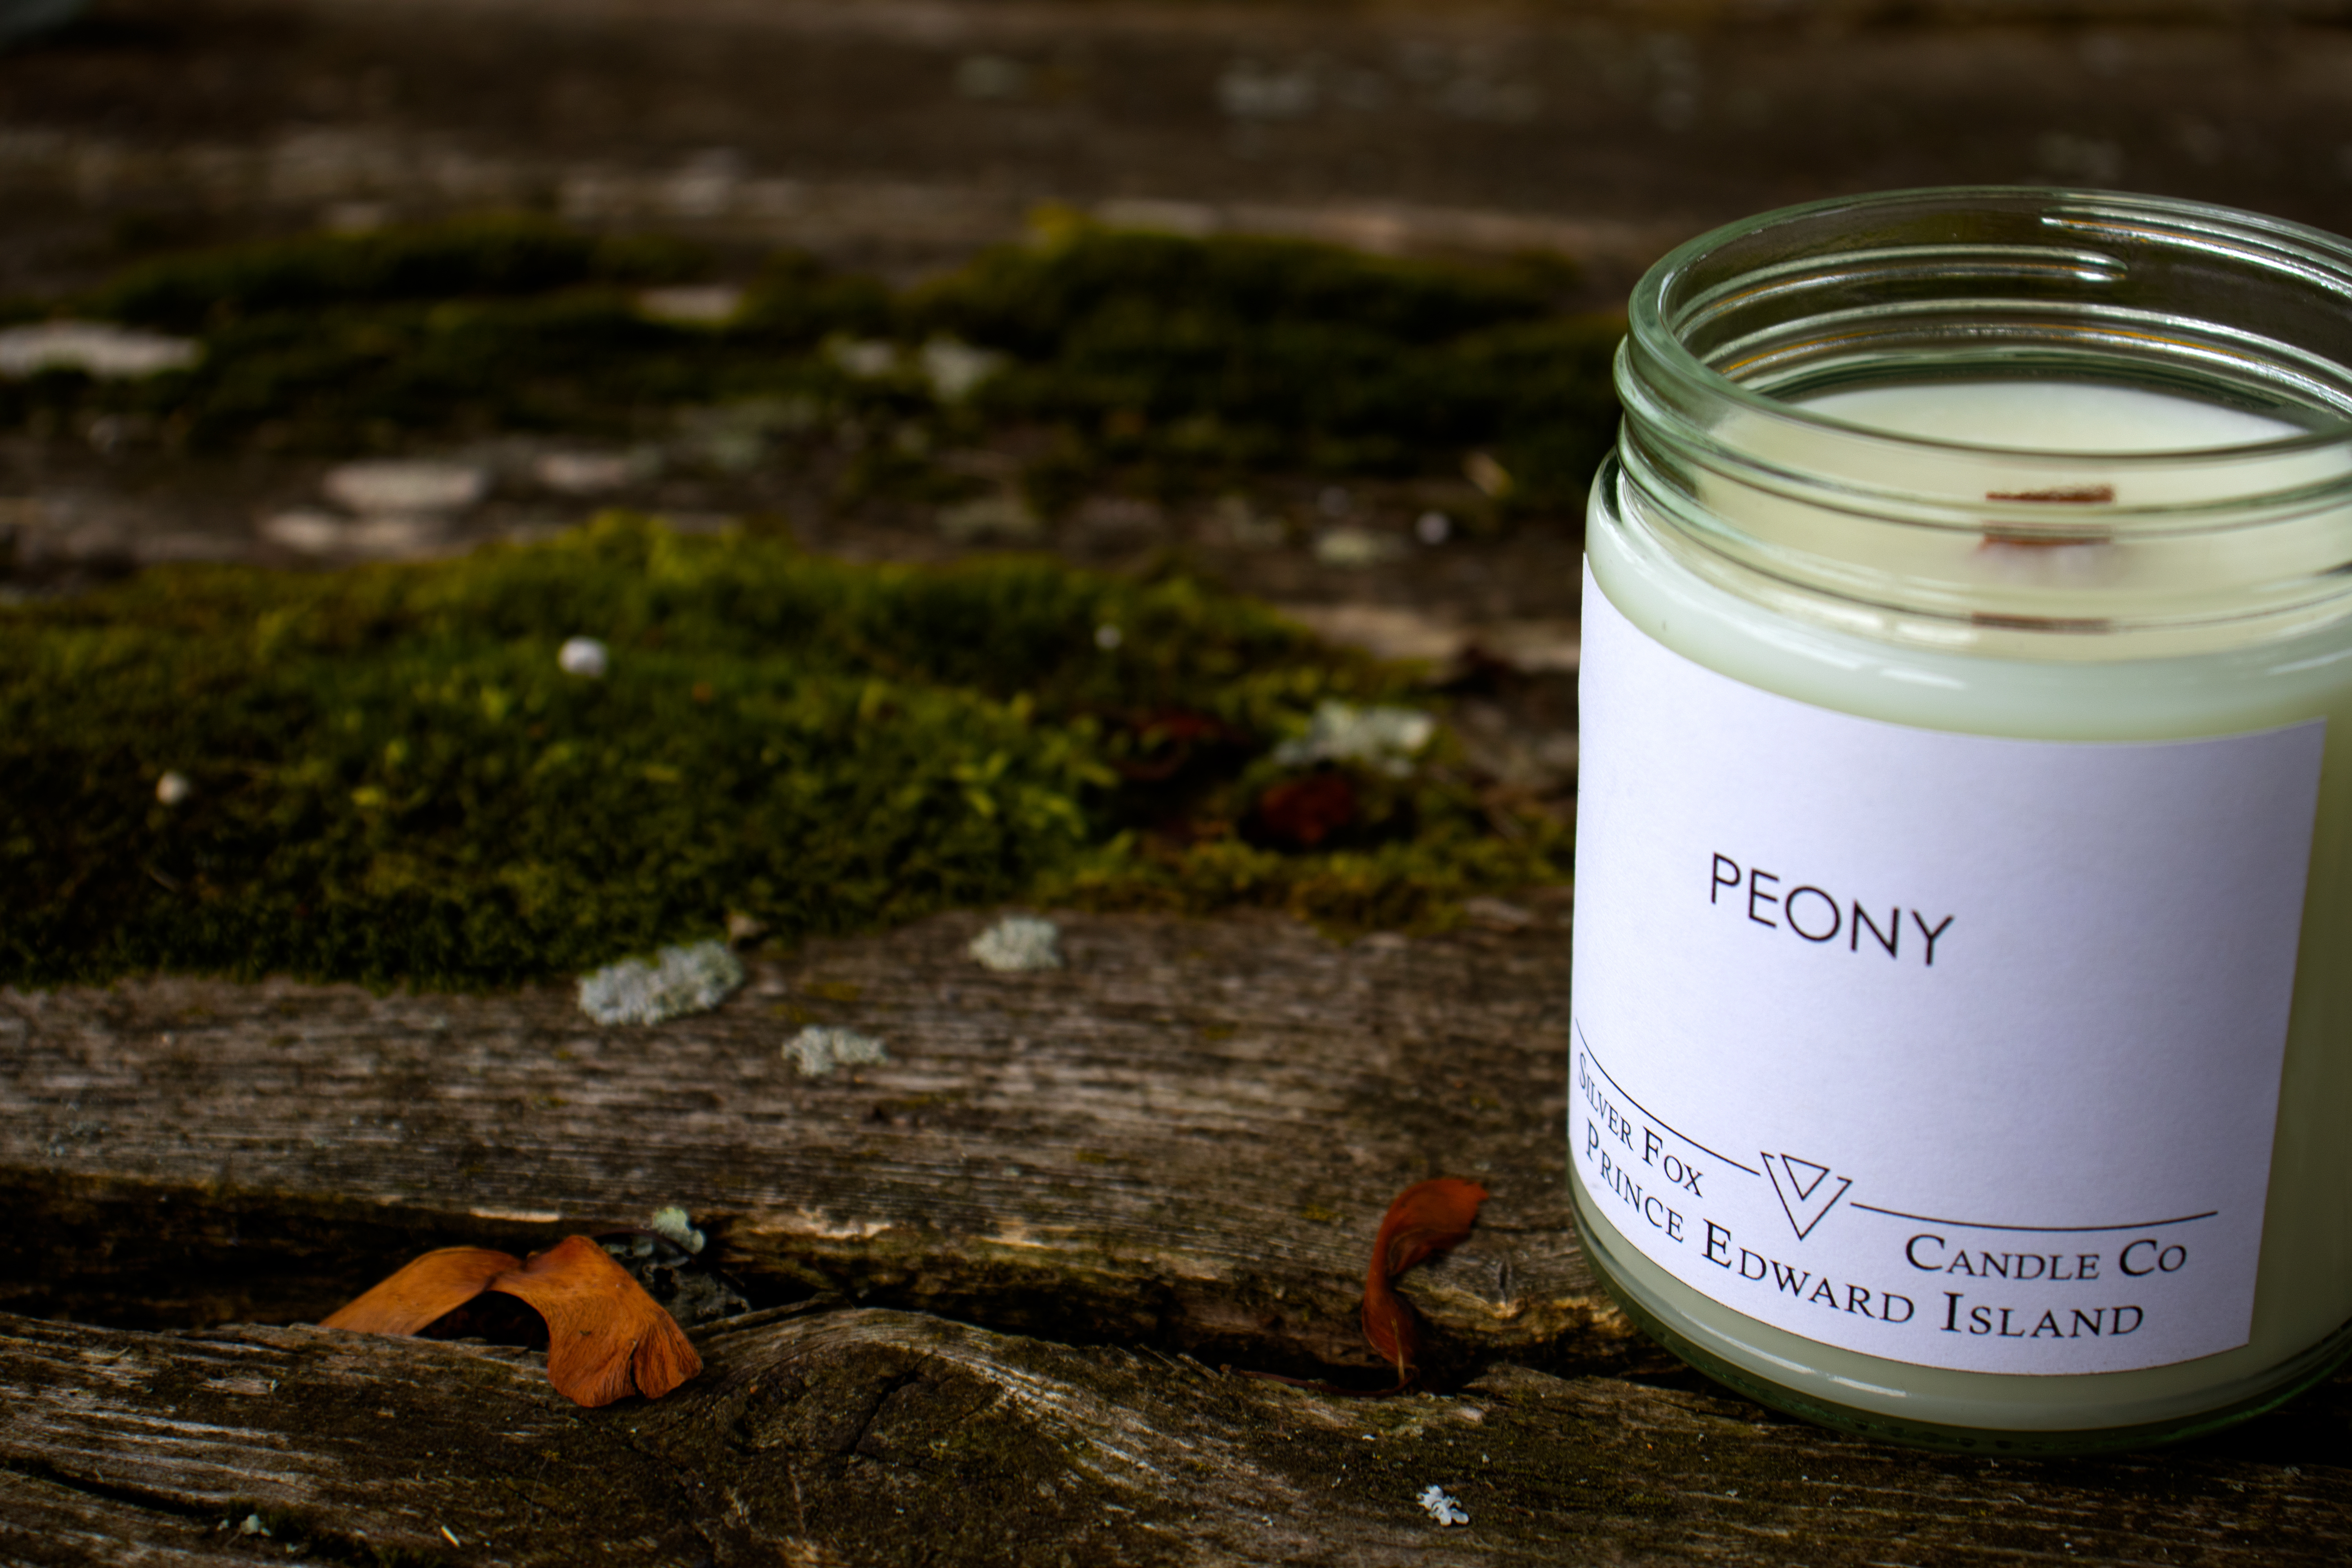 Peony Scented Soy Wax Candle from the Silver Fox Candle Company - Moss